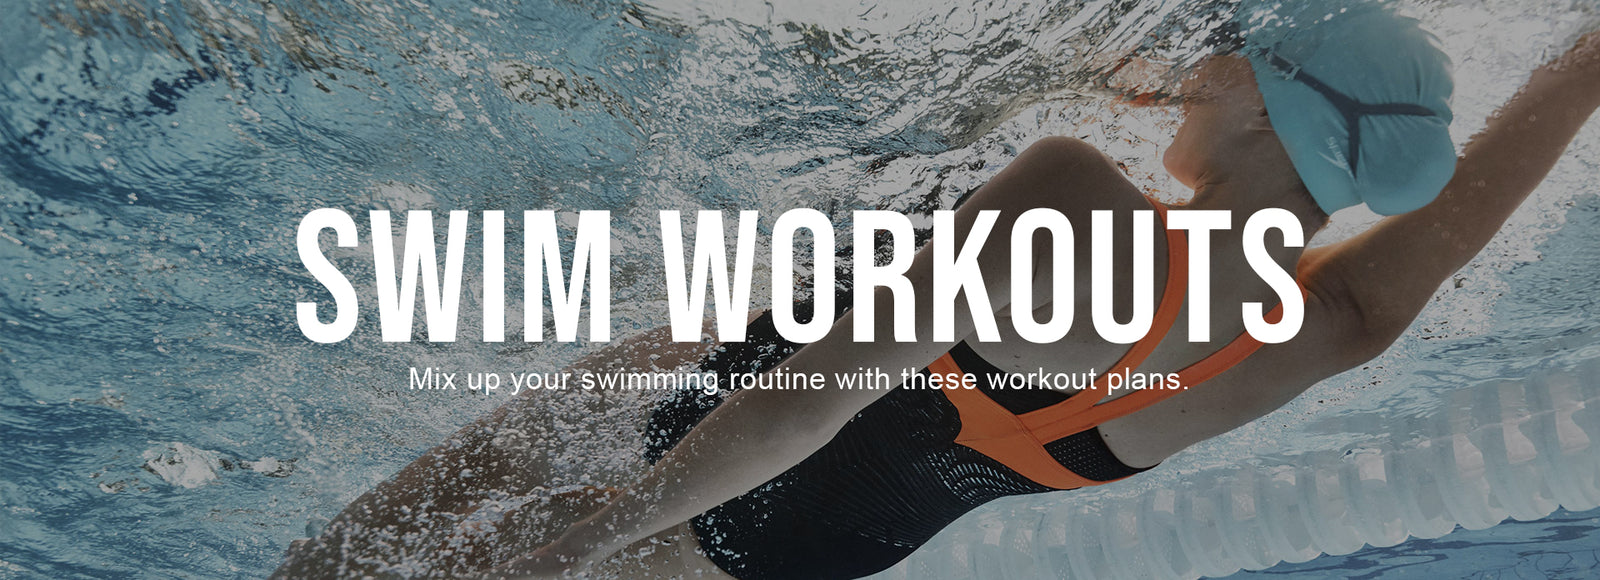 30 Minute Swim Workout To Mix Up Your Routine